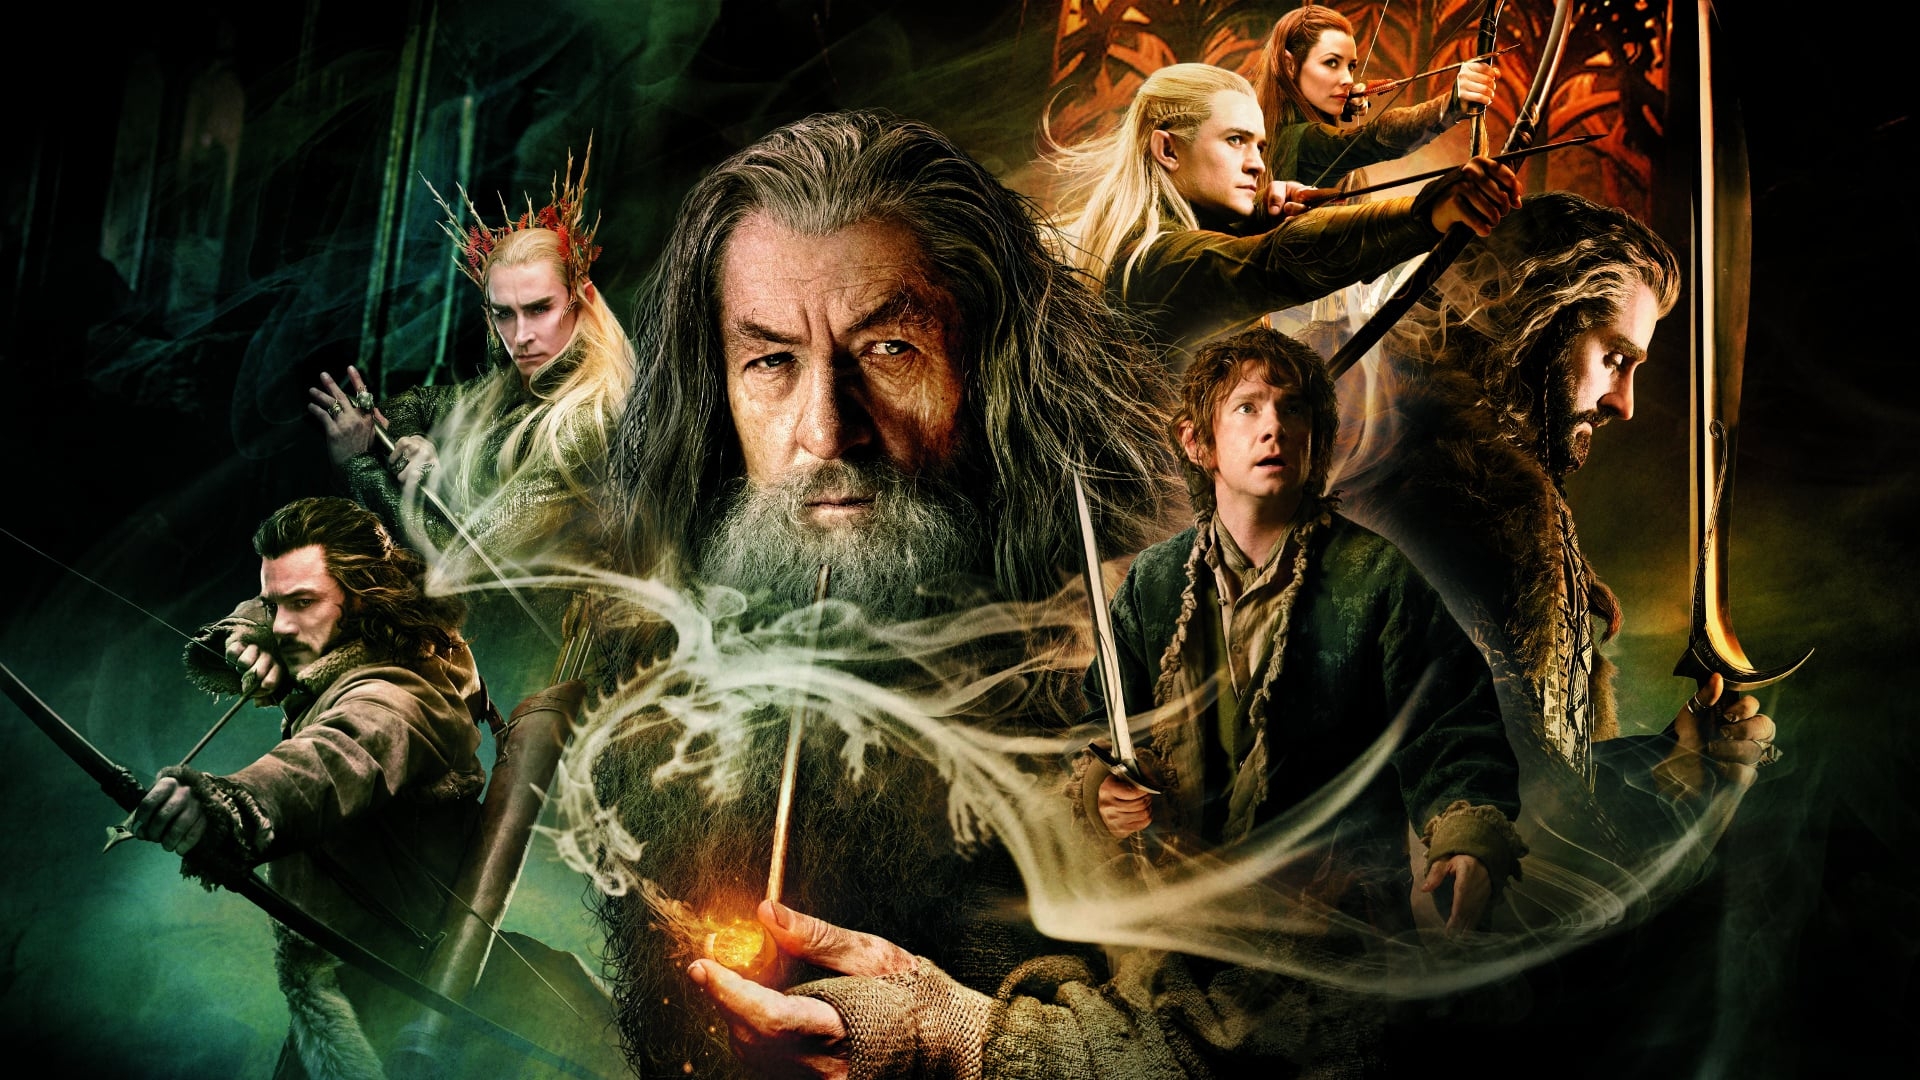 The Hobbit: The Desolation of Smaug (The Hobbit: The Desolation of Smaug)